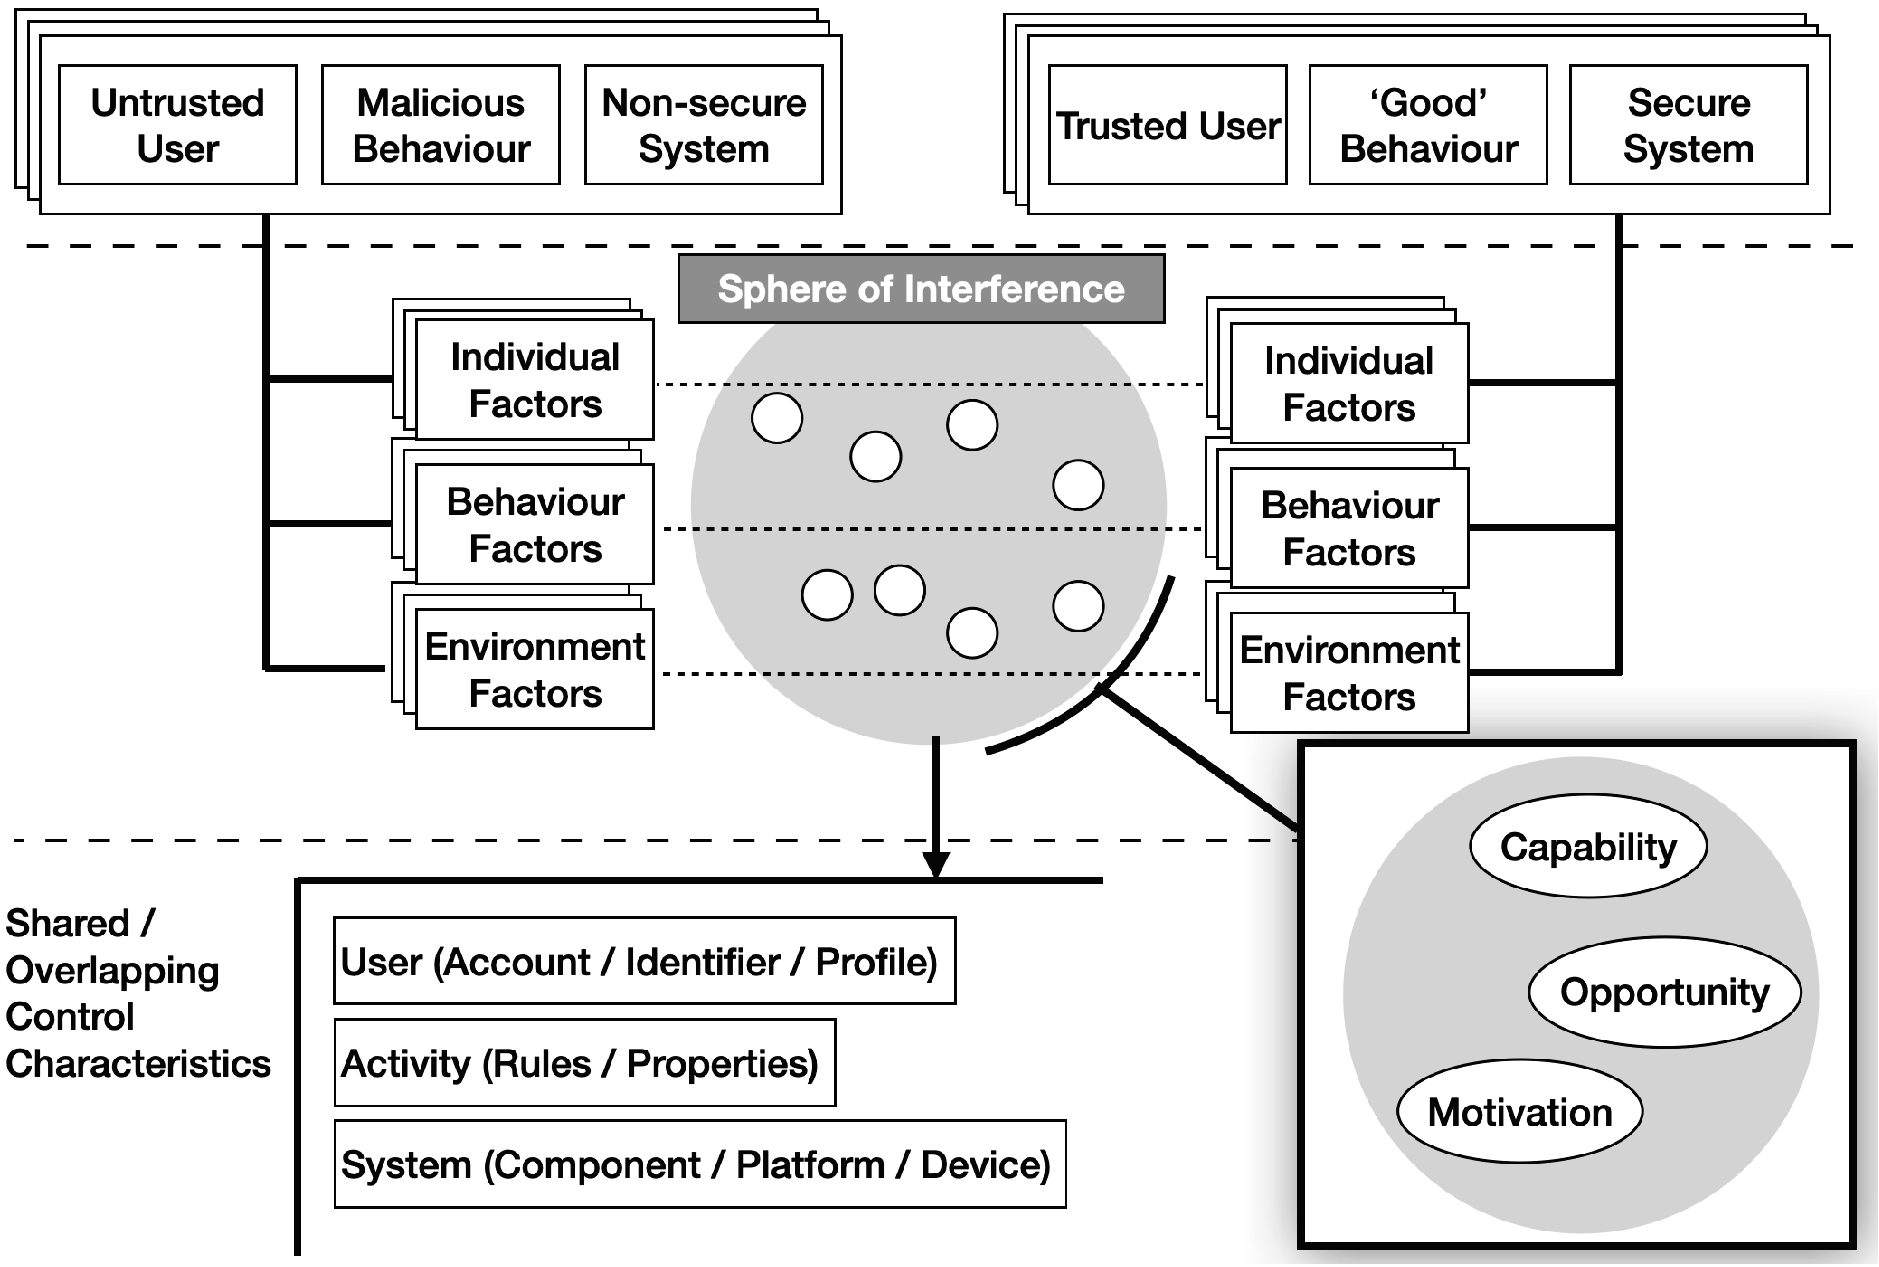 Overview of interactions between negative and positive behaviours in a managed (cyber) system, and related controls.